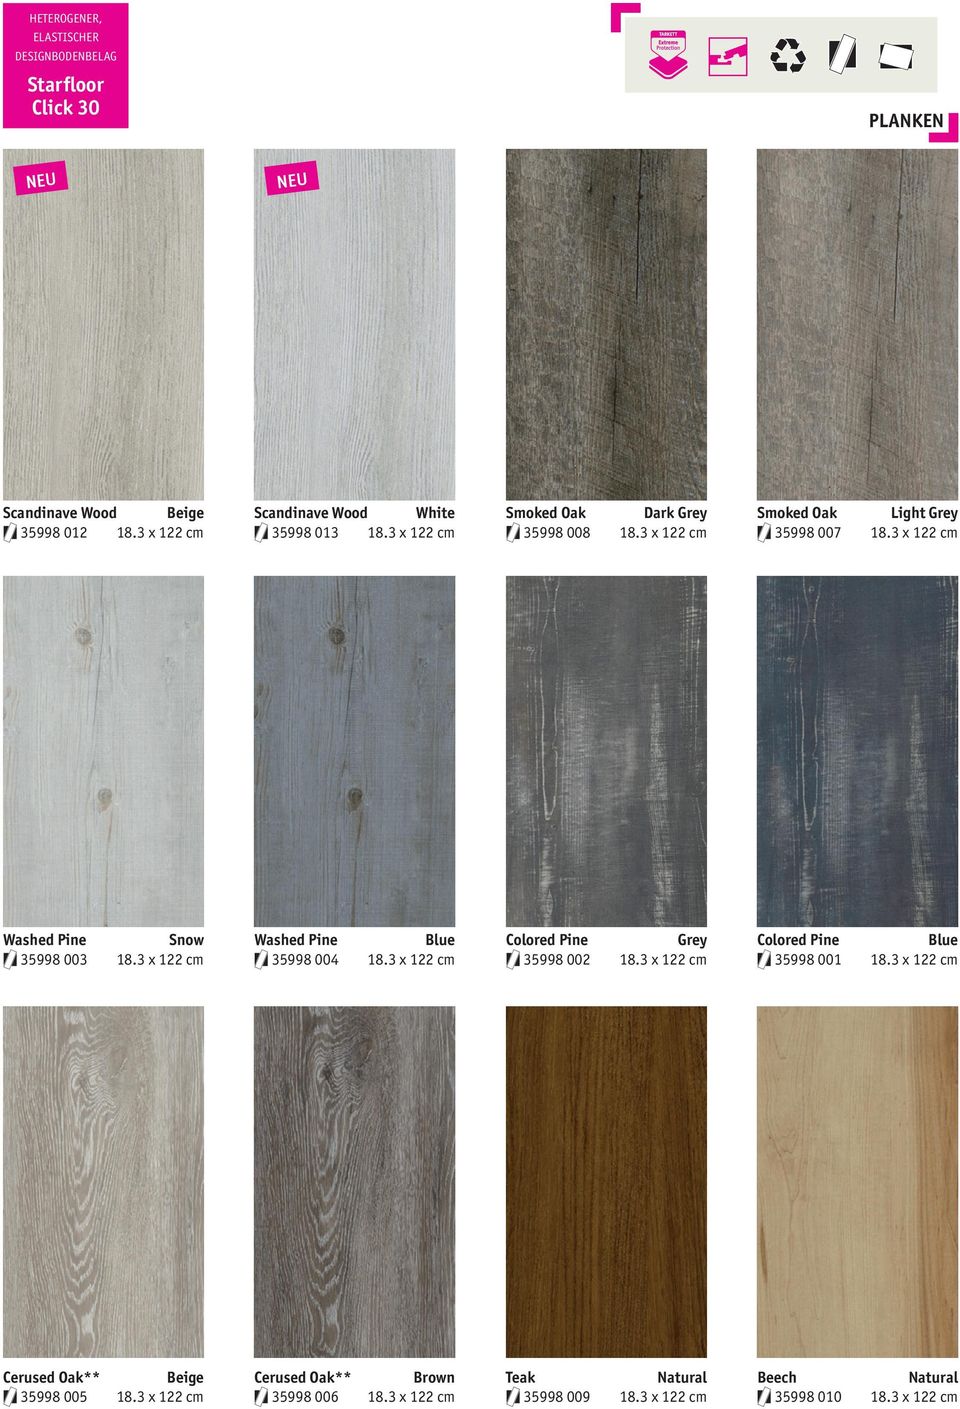 3 x 122 cm Washed Pine Blue 35998 004 18.3 x 122 cm Colored Pine Grey 35998 002 18.3 x 122 cm Colored Pine Blue 35998 001 18.